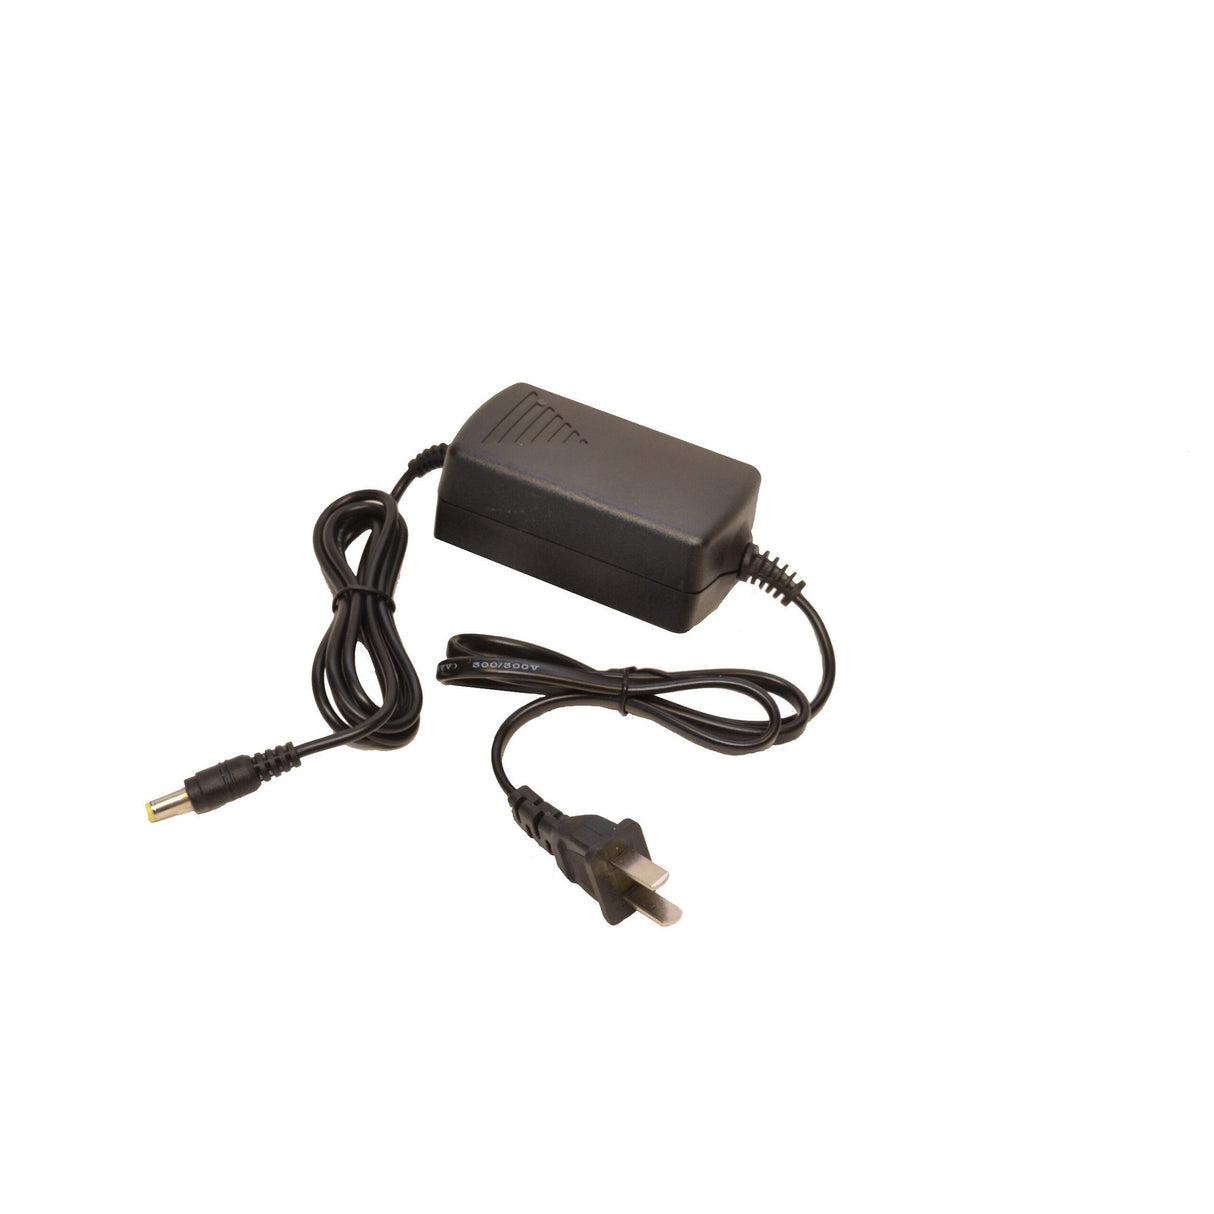 Bescor AC25 12V 2A Replacement AC Power Supply with 2.5mm Power Plug Output